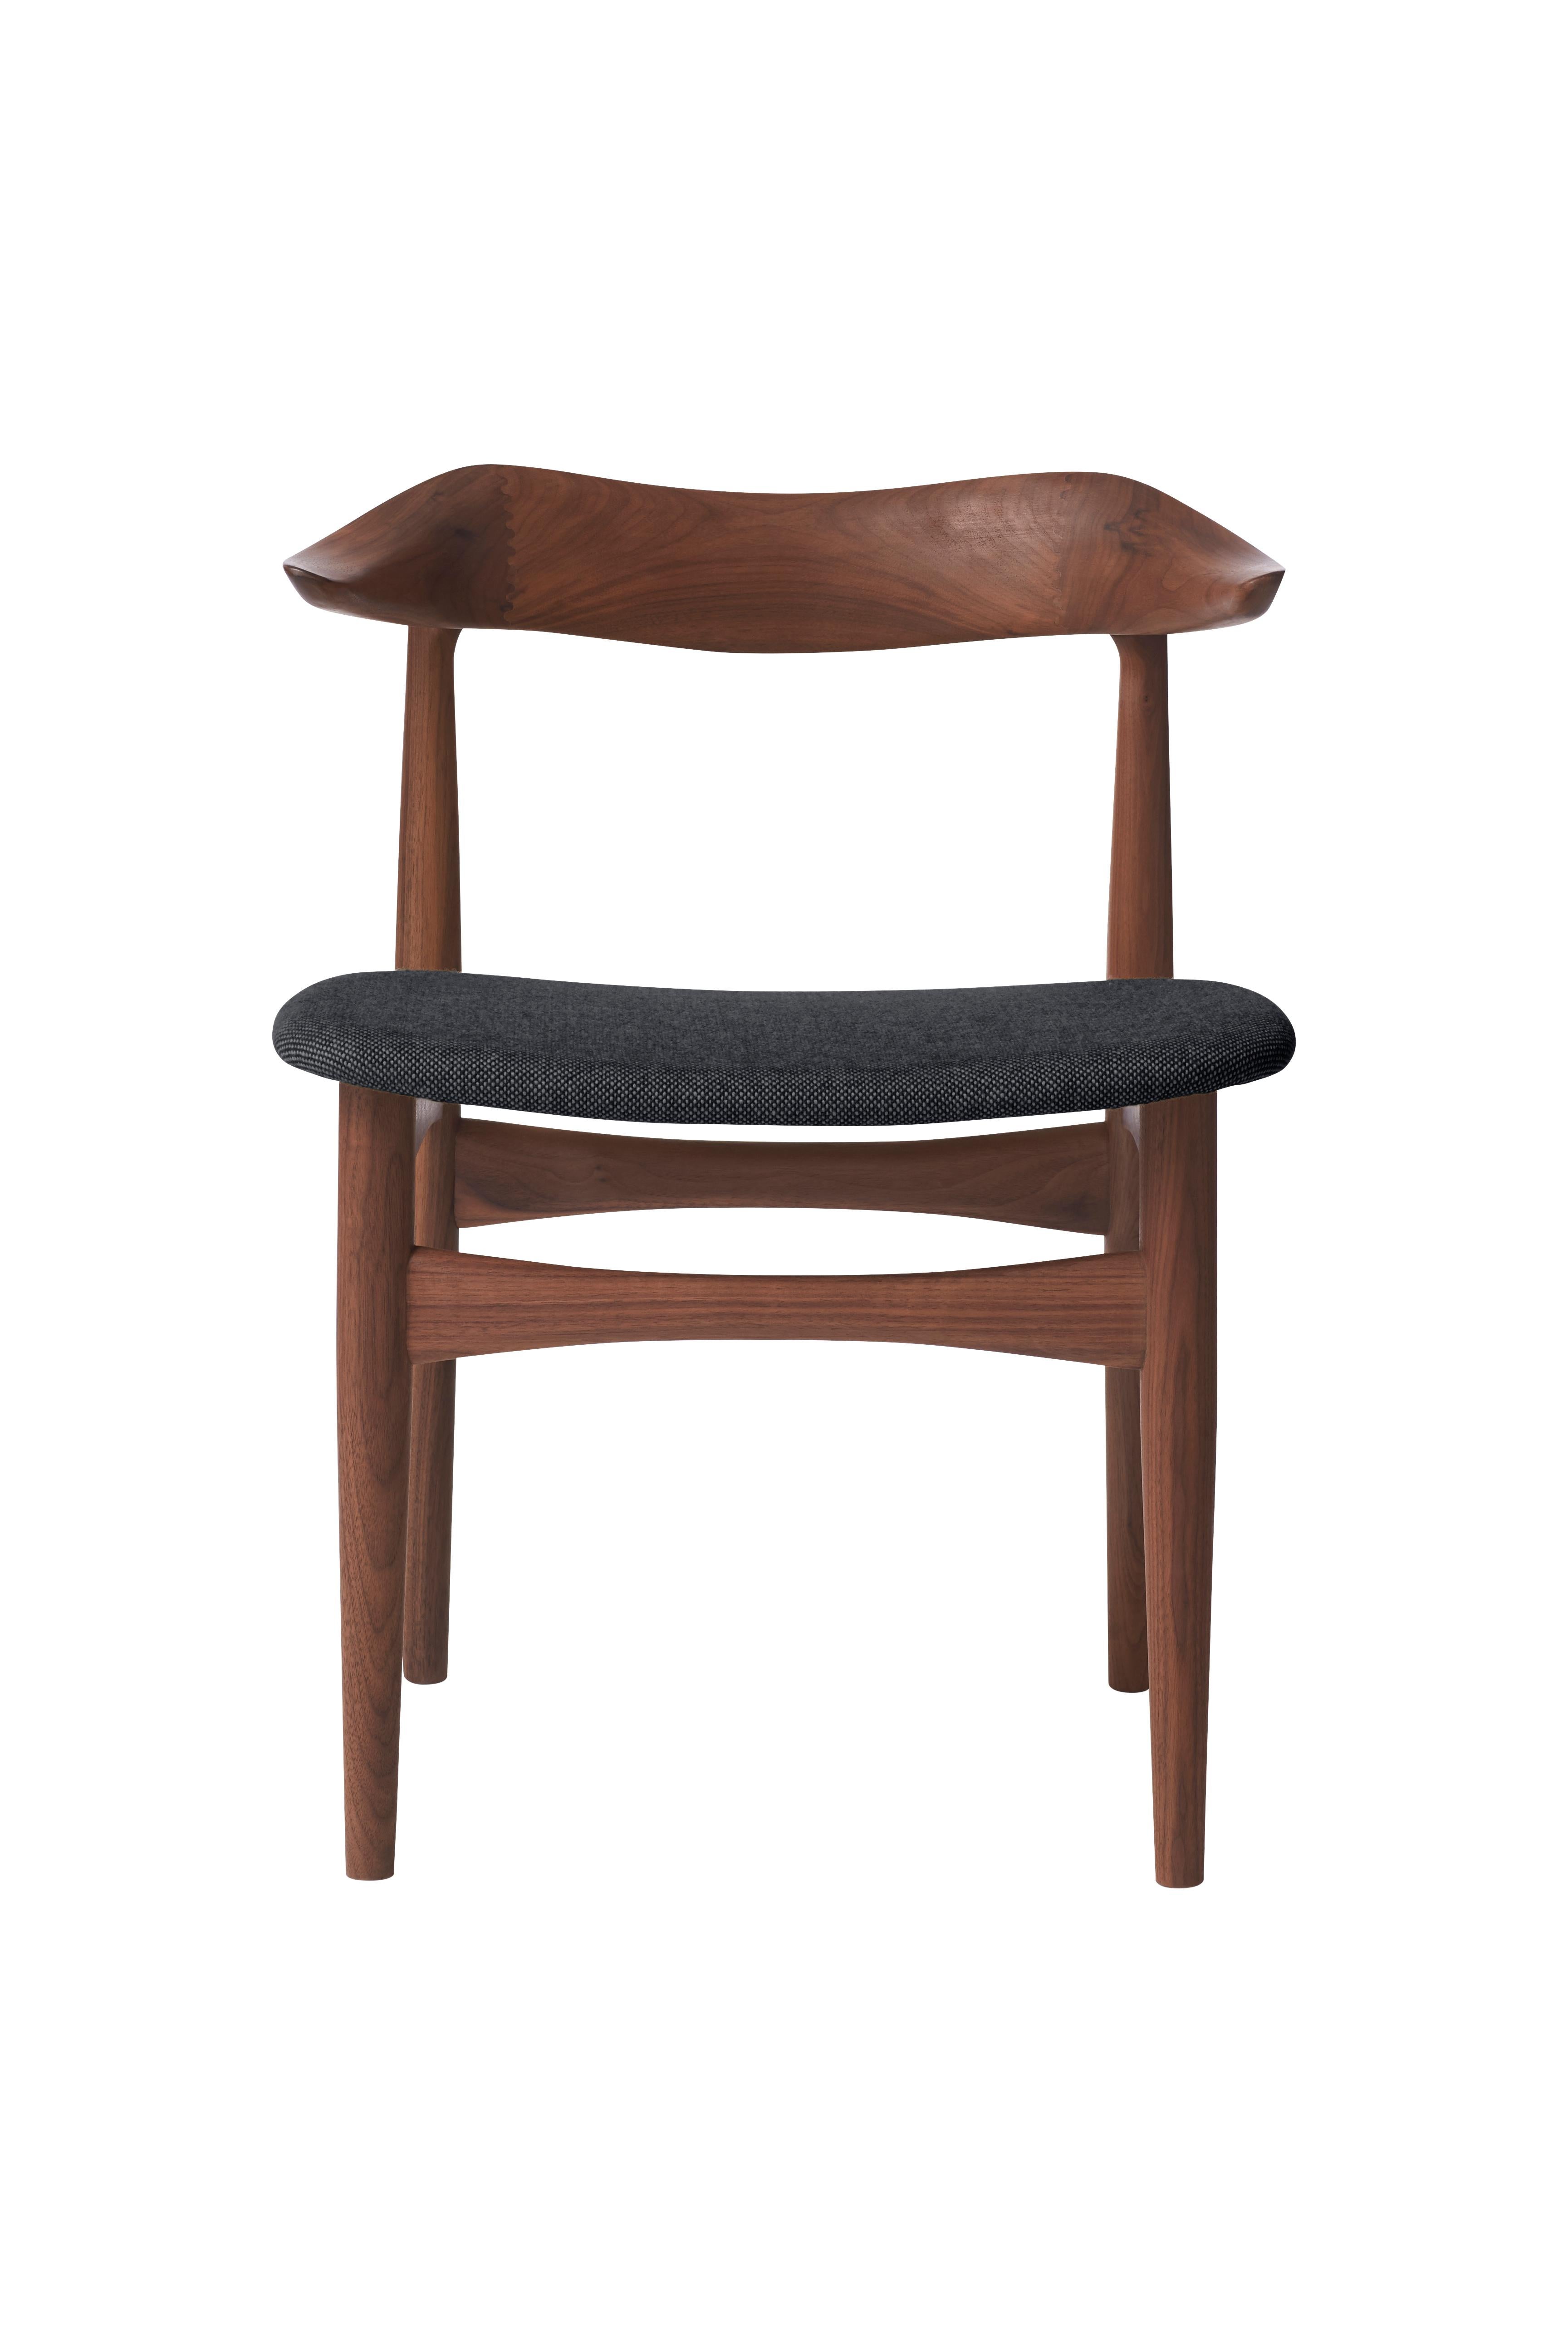 For Sale: Black (Hallingdal 180) Cow Horn Walnut Chair, by Knud Færch from Warm Nordic